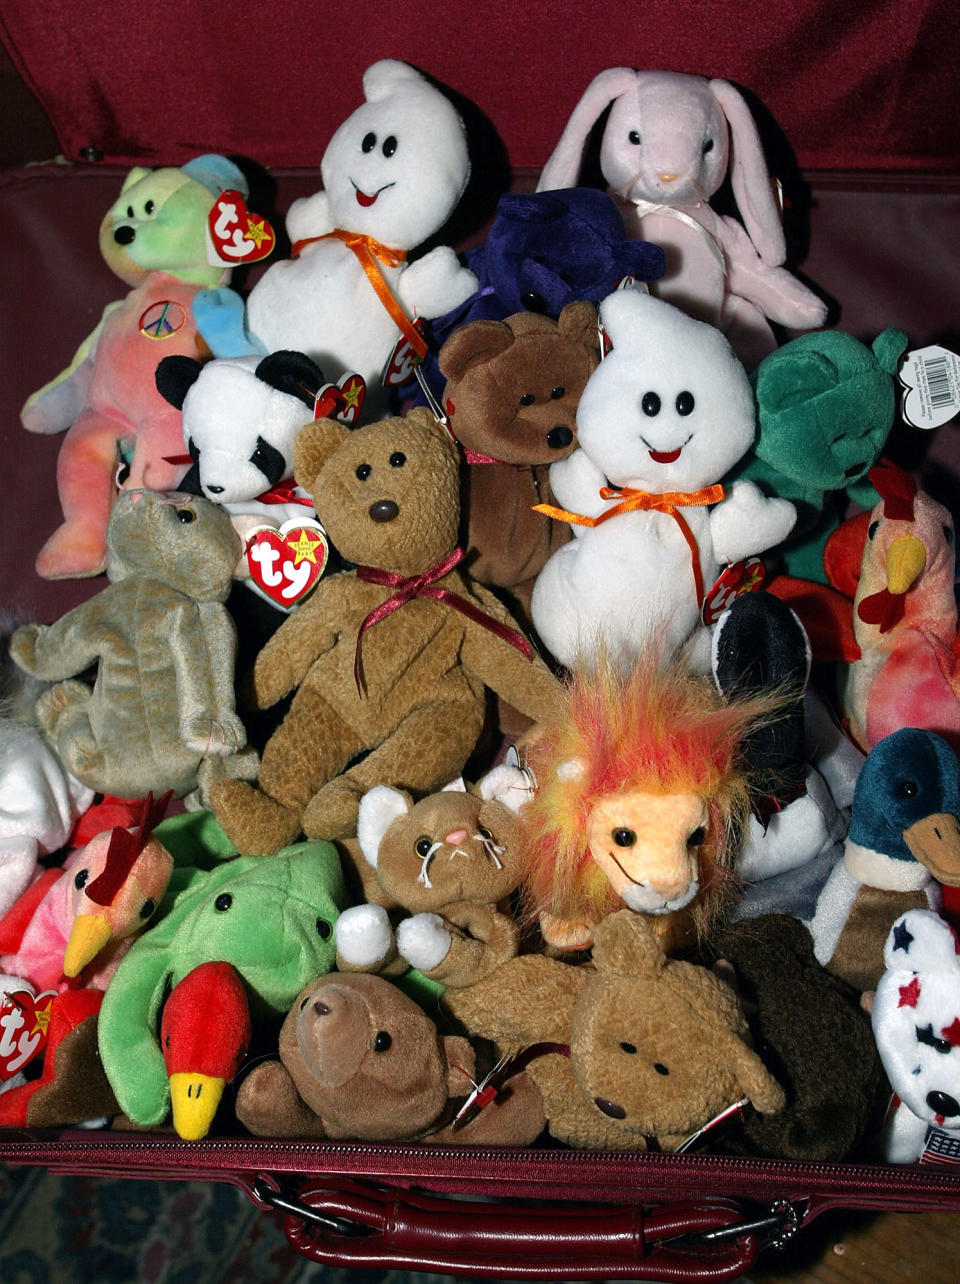 (9/1/04 Boston, MA) BEANIE BABIES - Value has dropped in the collection of Mark from Somerville, who hoped to turn a profit in selling his investment.. (Staff Photo by Mike Adaskaveg. Saved in Thursday) (Photo by Mike Adaskaveg/MediaNews Group/Boston Herald via Getty Images)